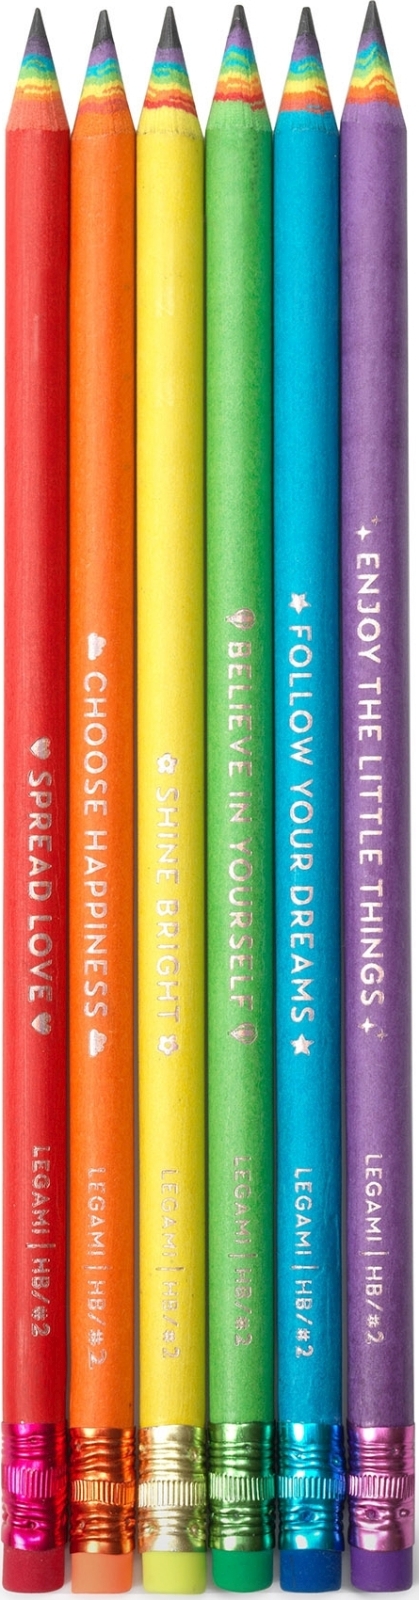 Legami Happiness For Every Day - Set Of 6 Hb Graphite Pencils